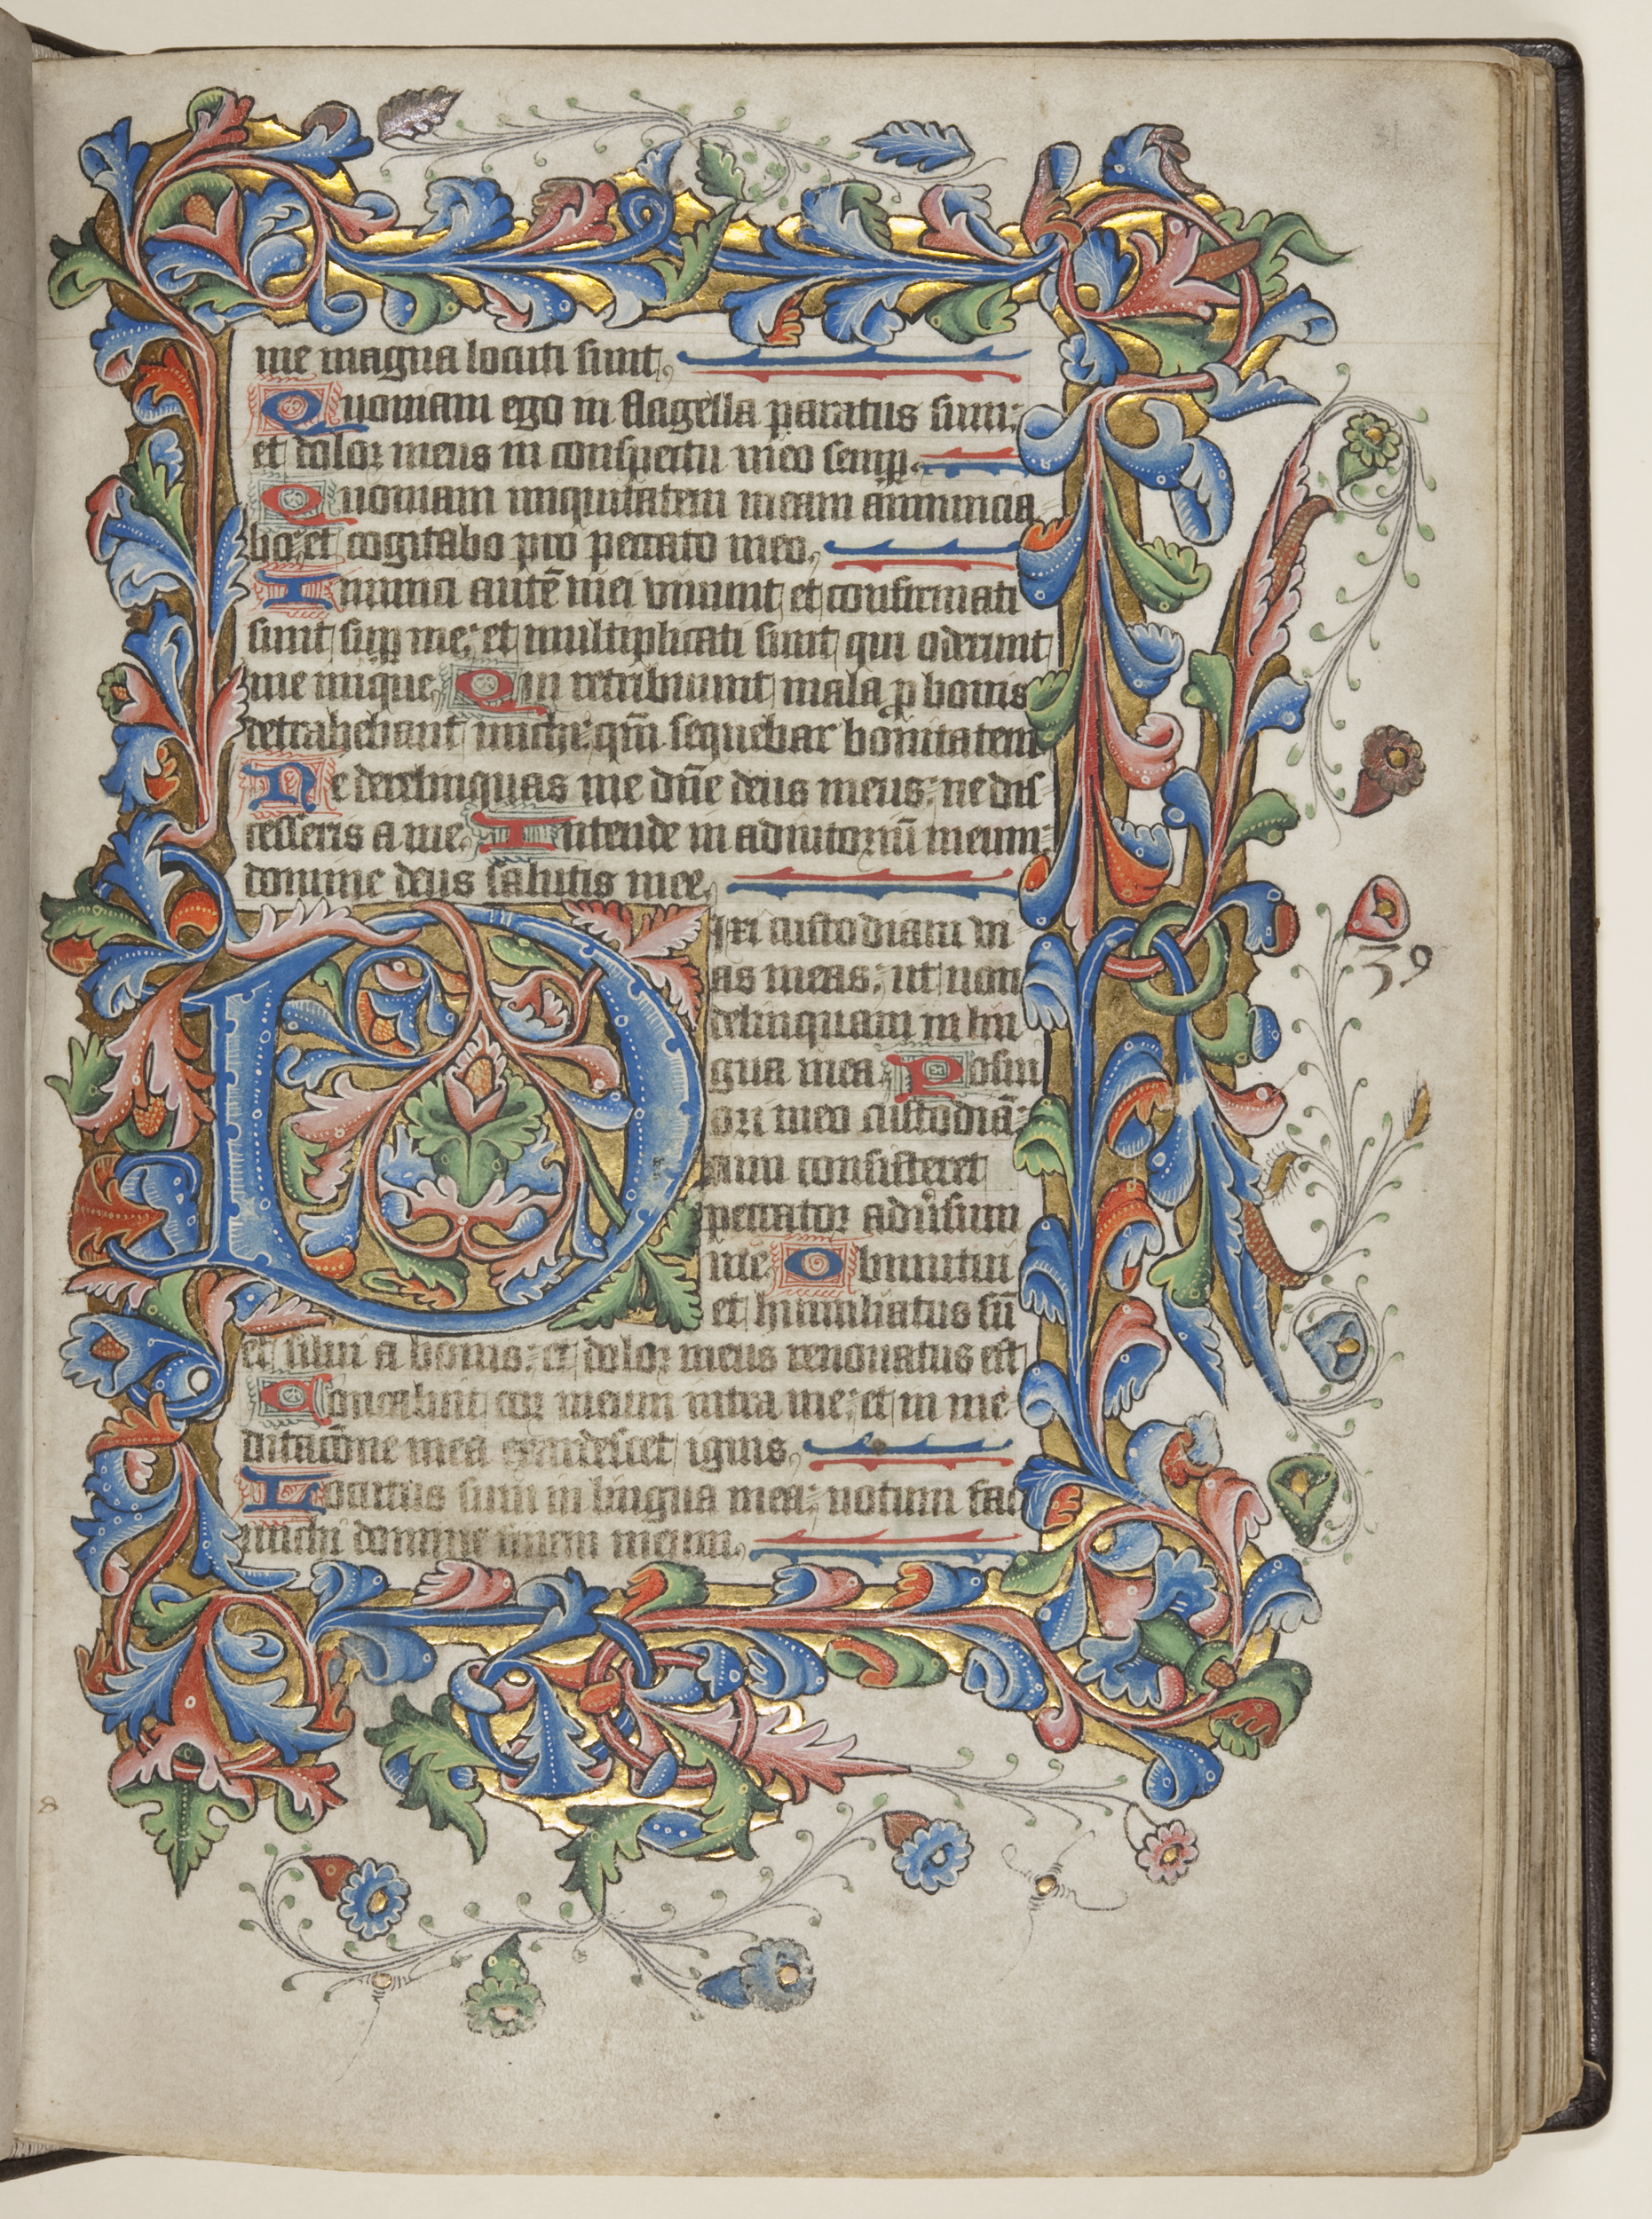 An illuminated initial 'D' from the “St Andrews Psalter” (St Andrews msBX2033.A00)